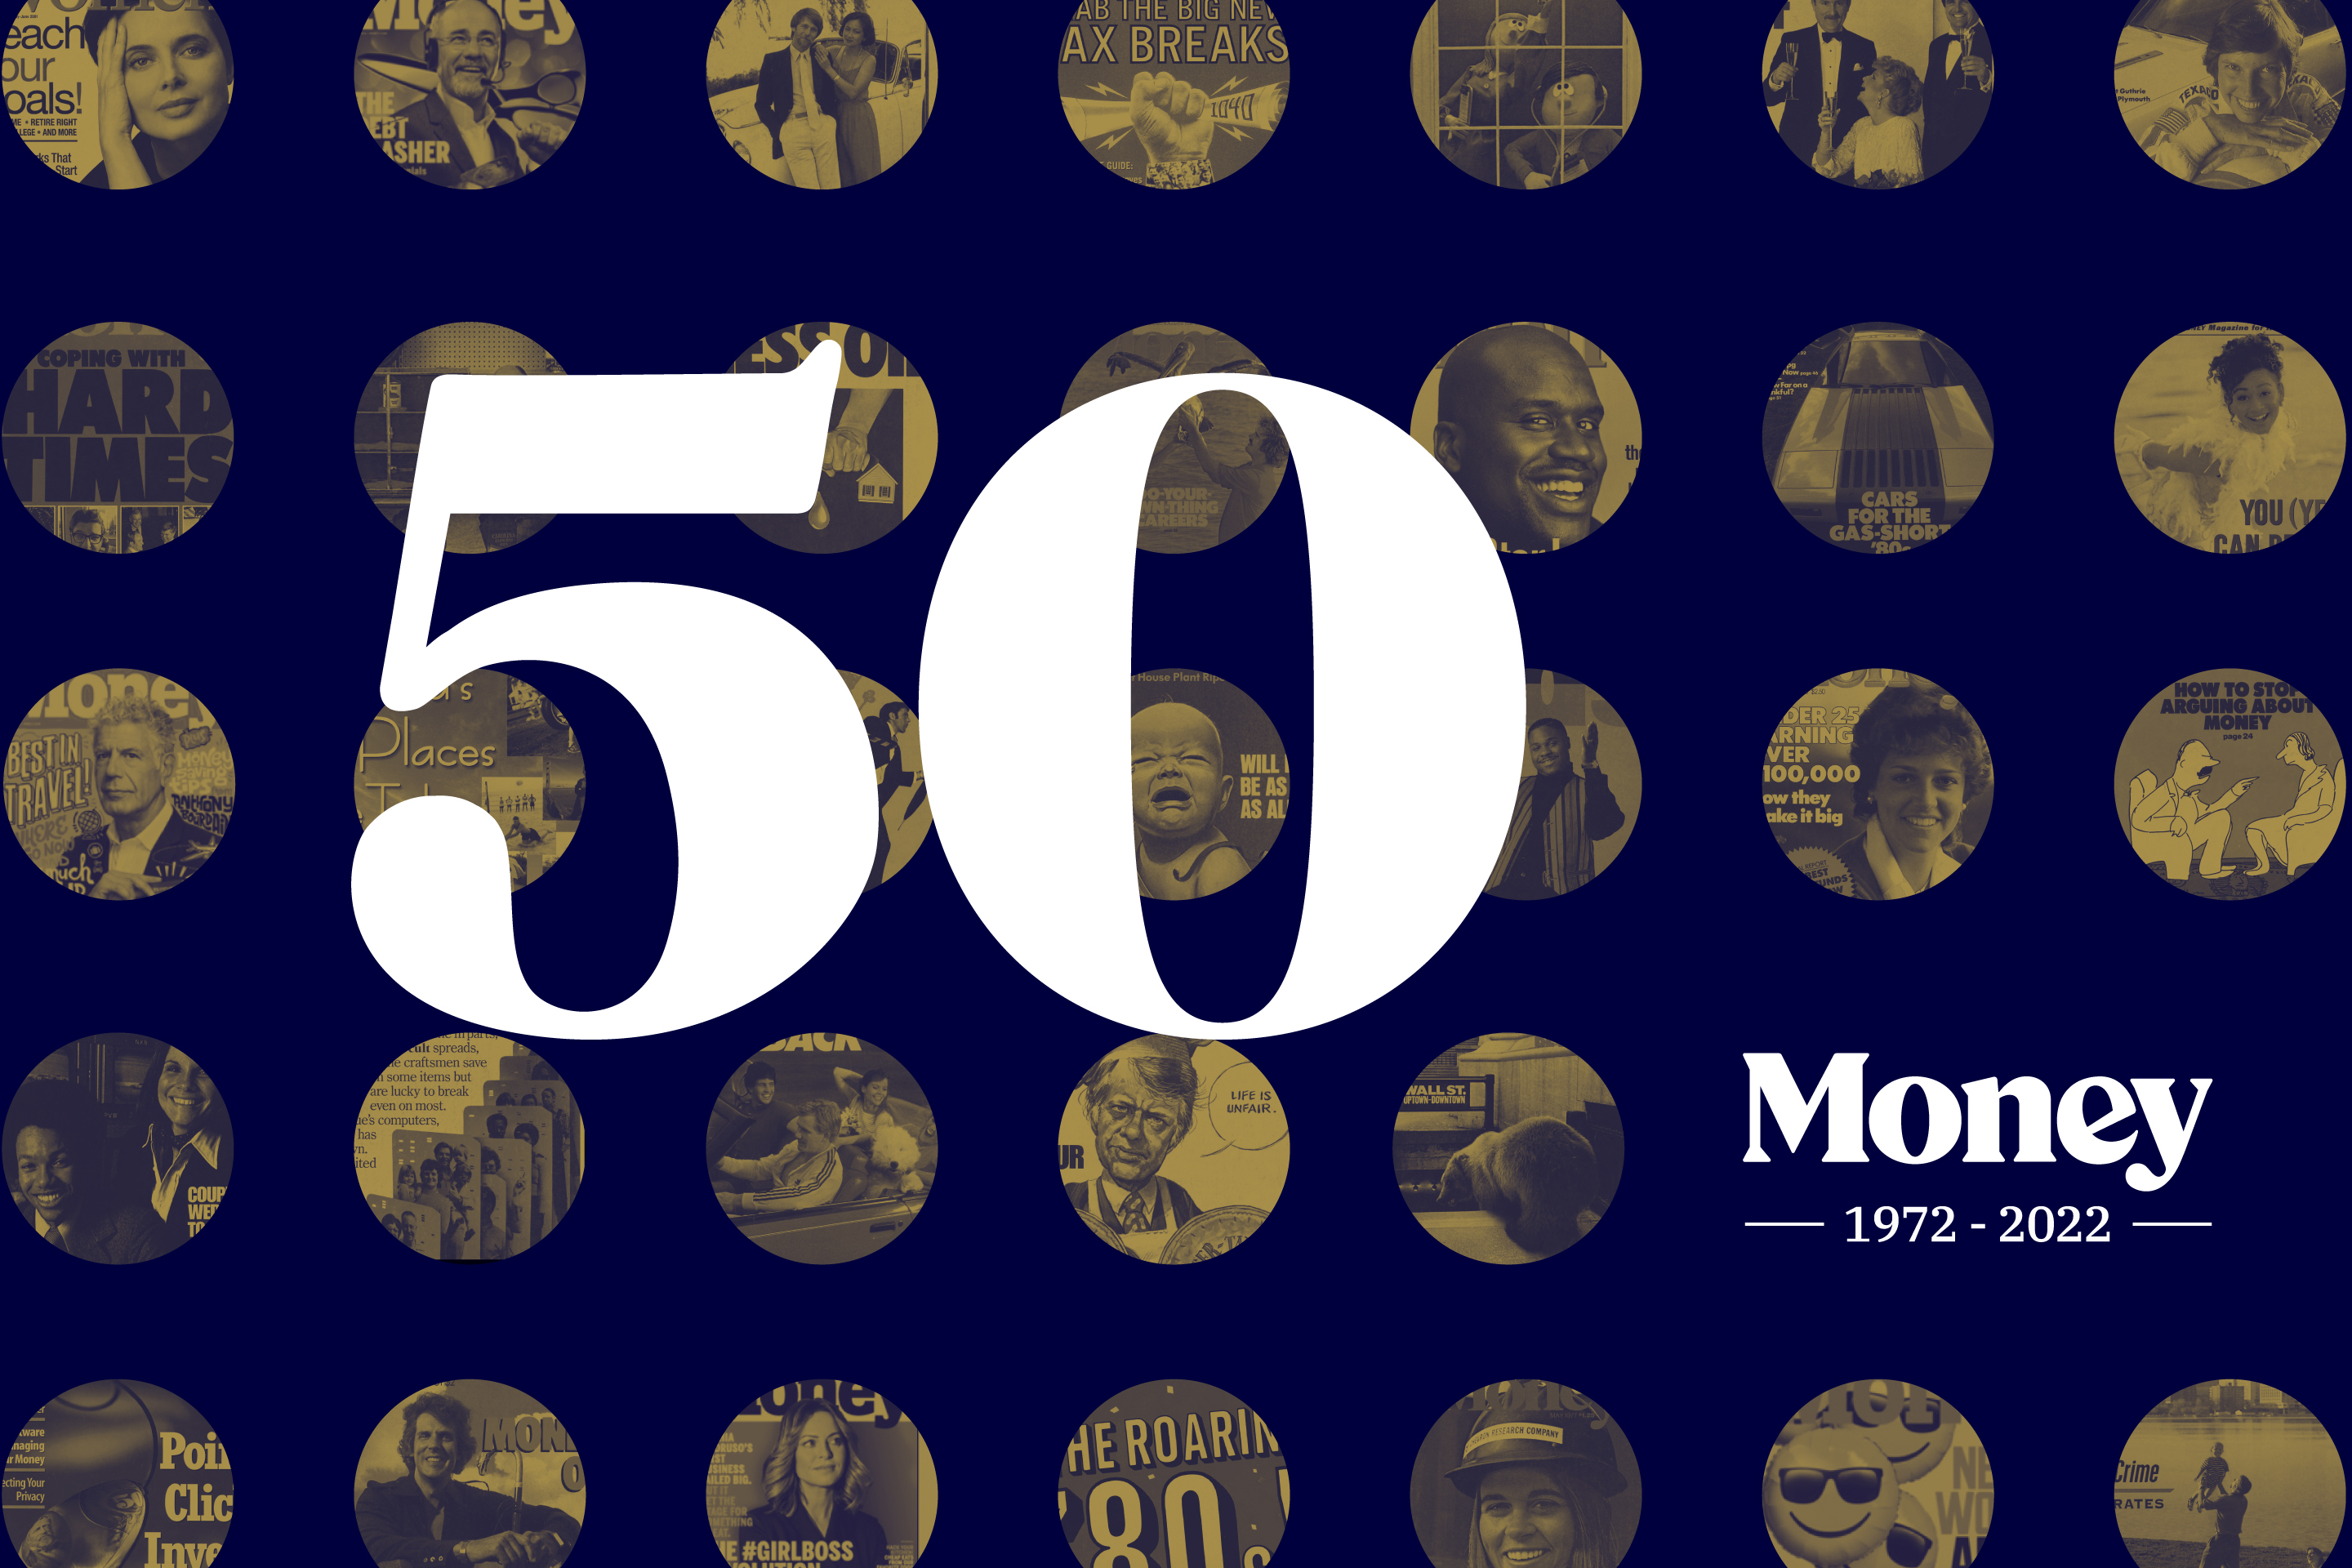 Money Turns 50 This Year, and We Have Exciting Plans